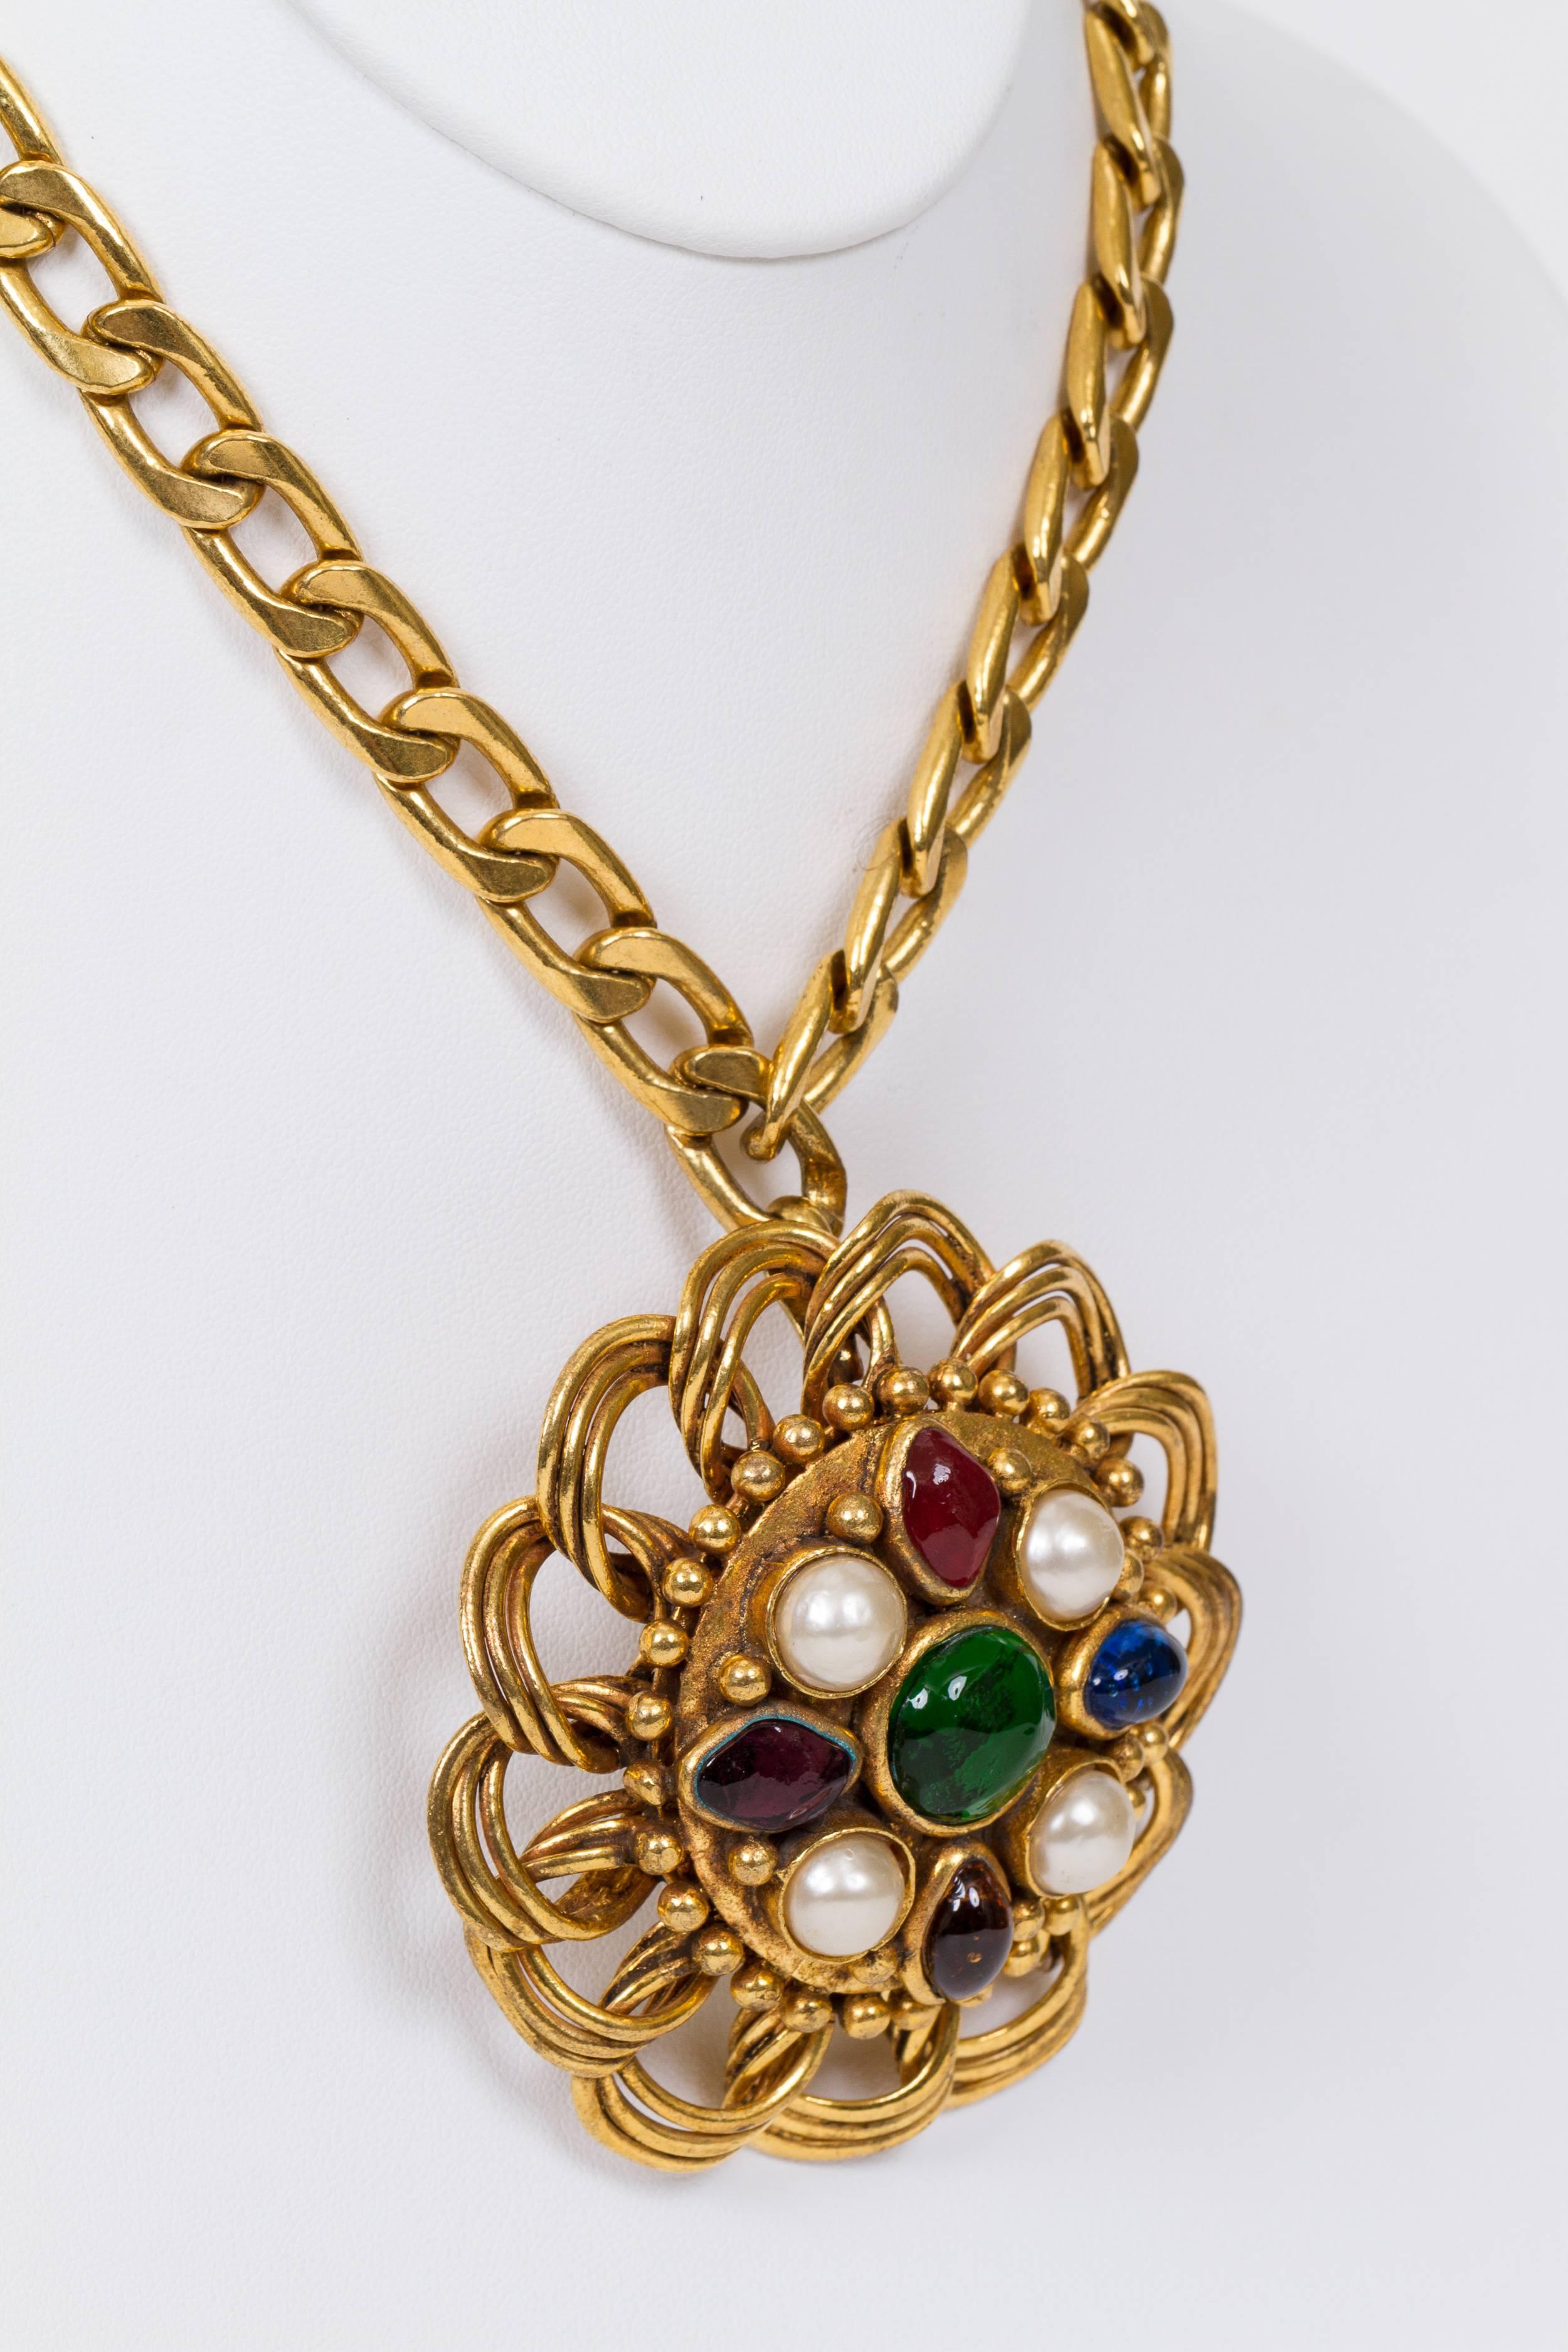 Rare 1970s Chanel oversize multicolor gripoix and faux-pearl detachable pendant choker. Six-link extension was added in the 1980s. Comes with original box.